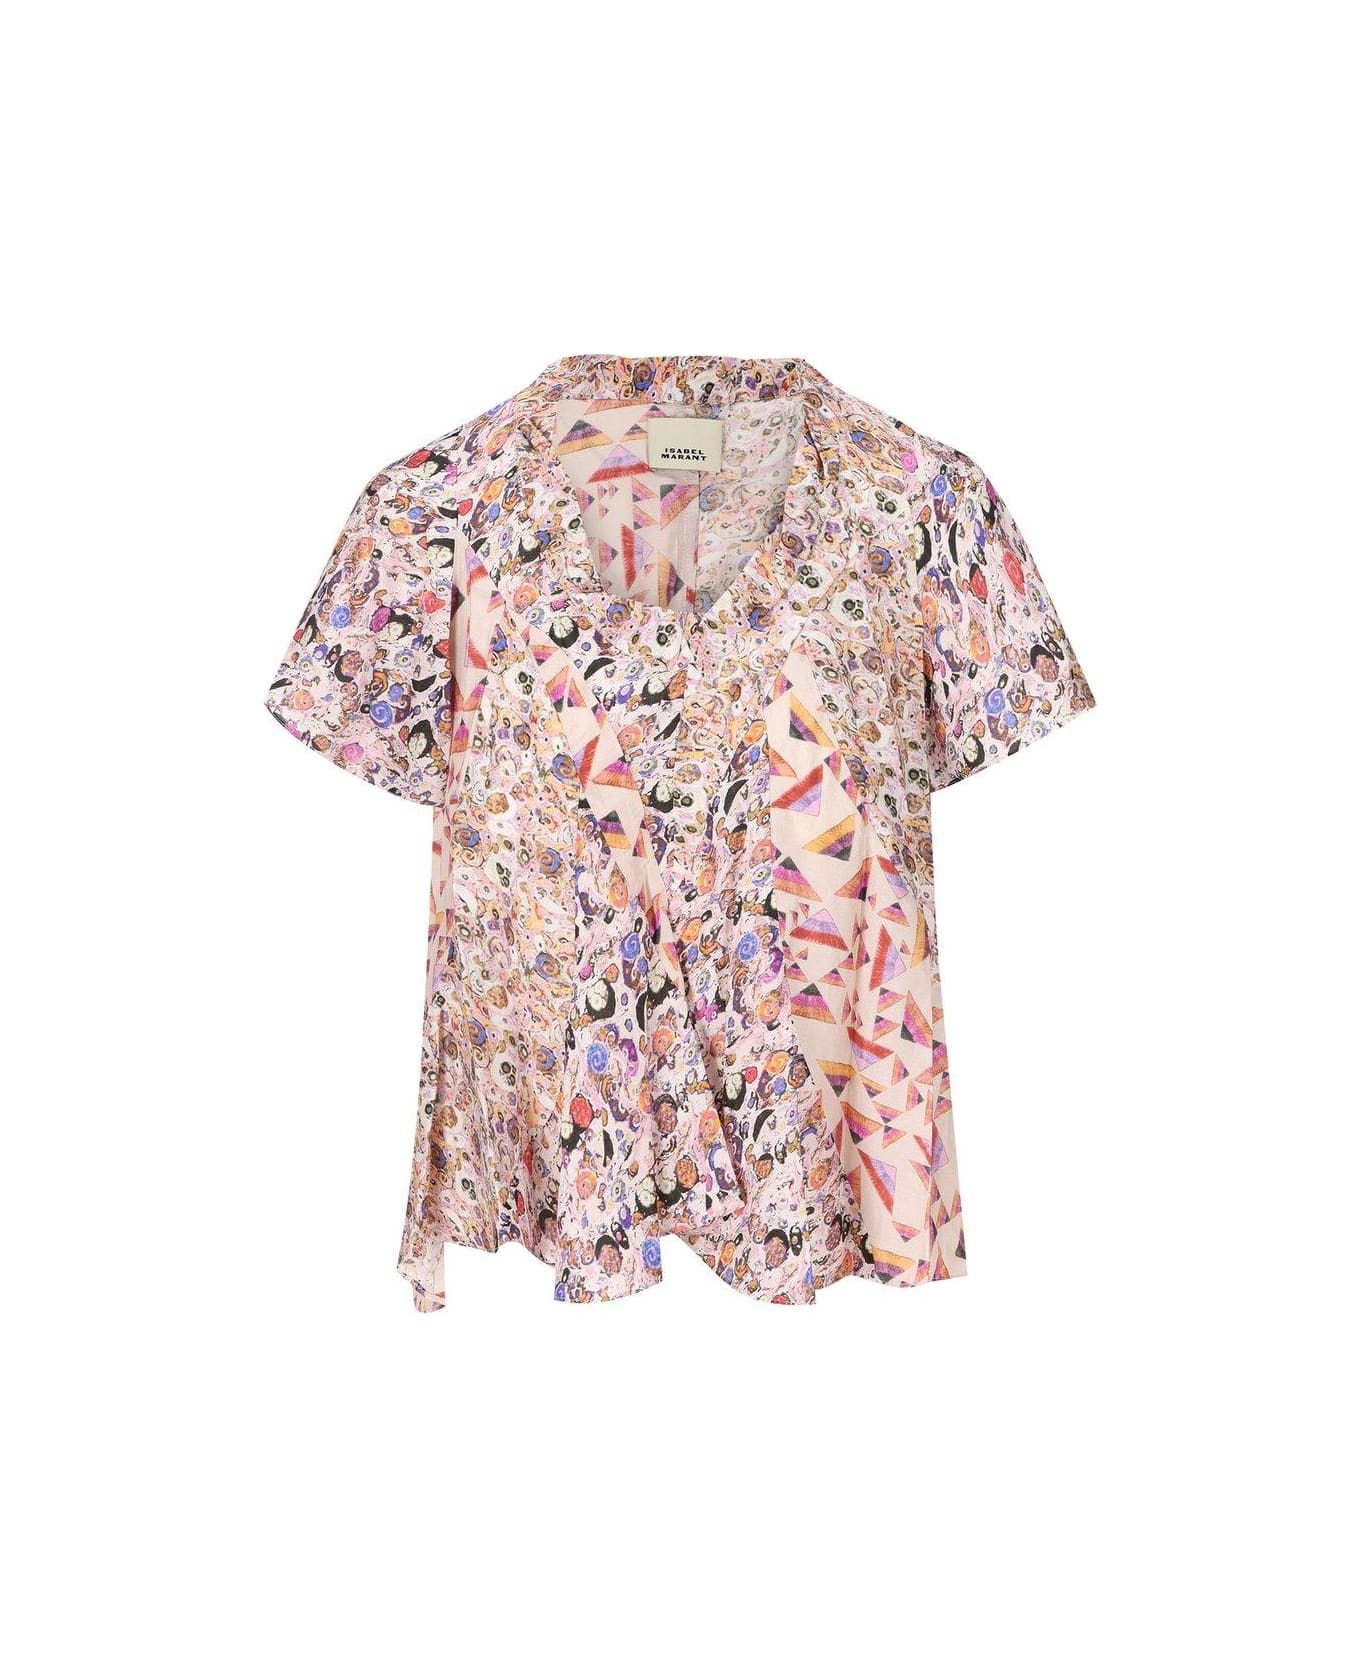 Isabel Marant All-over Print Shirts - Beige トップス